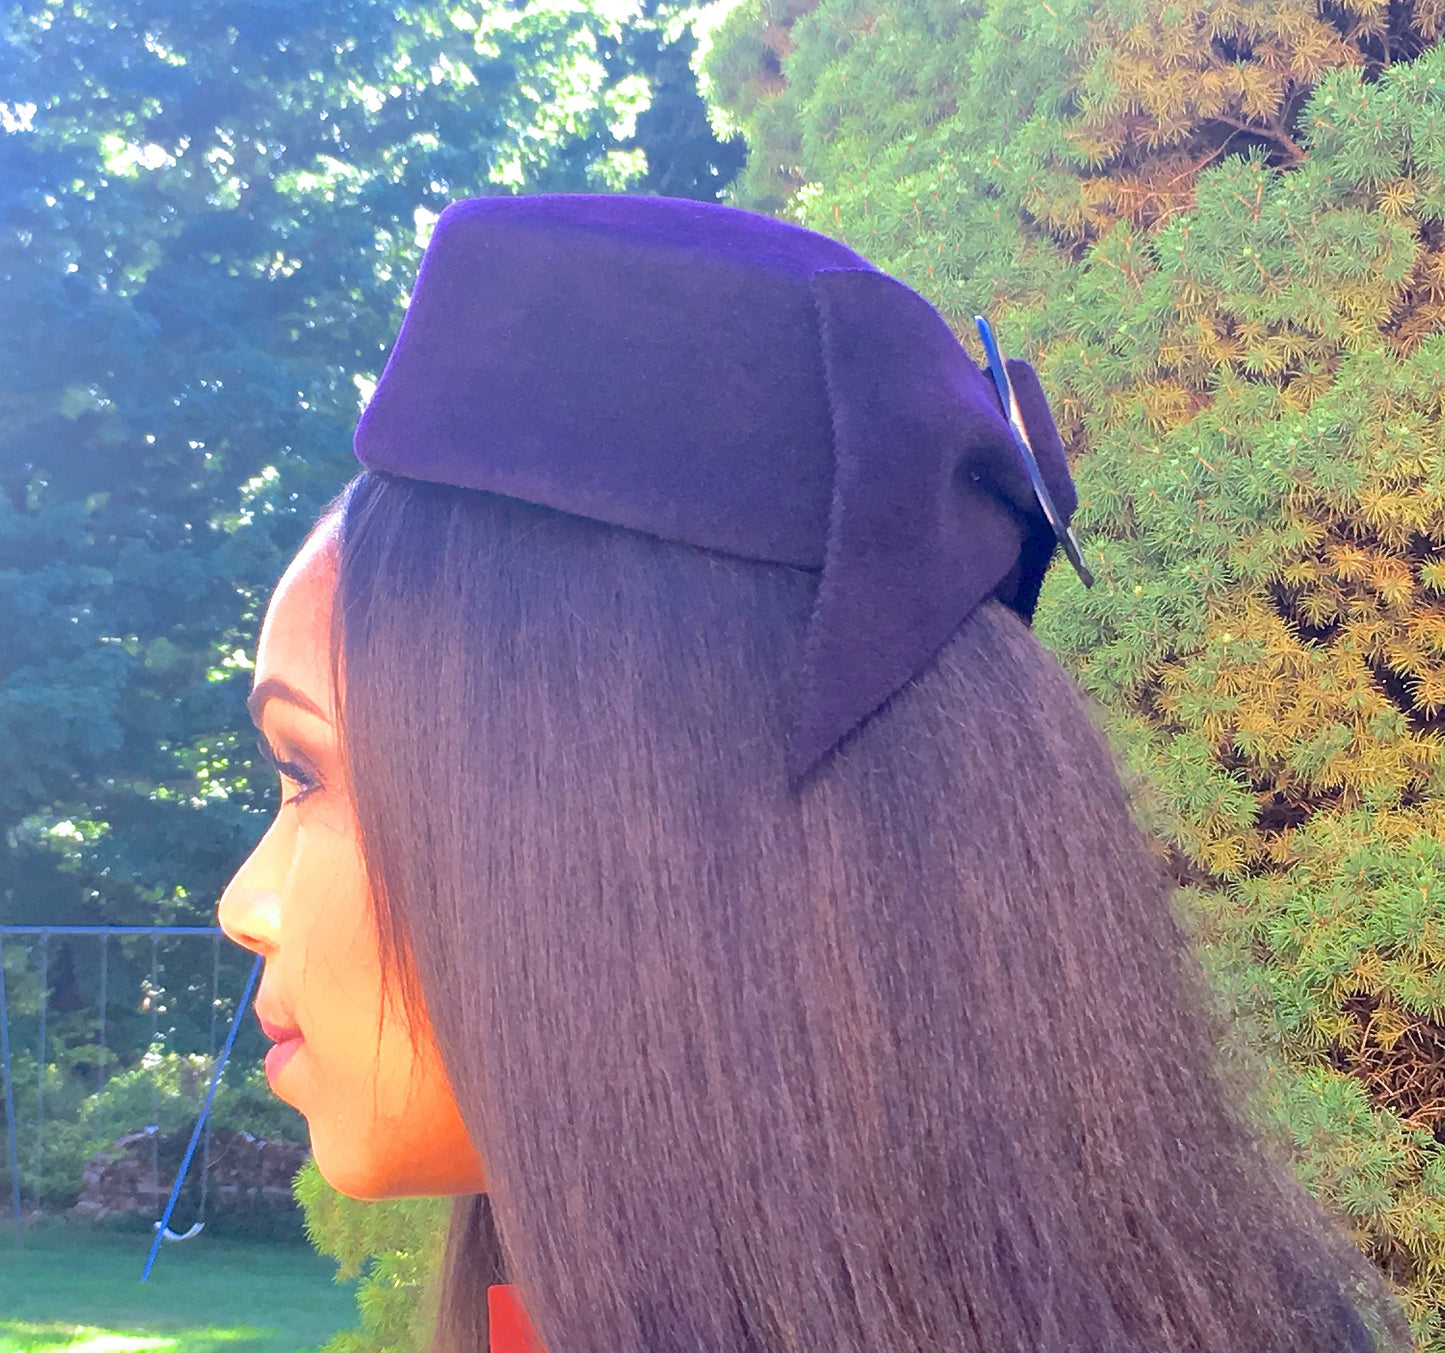 AUBERGINE VELOUR PILLBOX-with bow and vintage buckle-Weddings-Mother of the bride-winter races-Polo matches-holiday hat-fall hat-Purple hat